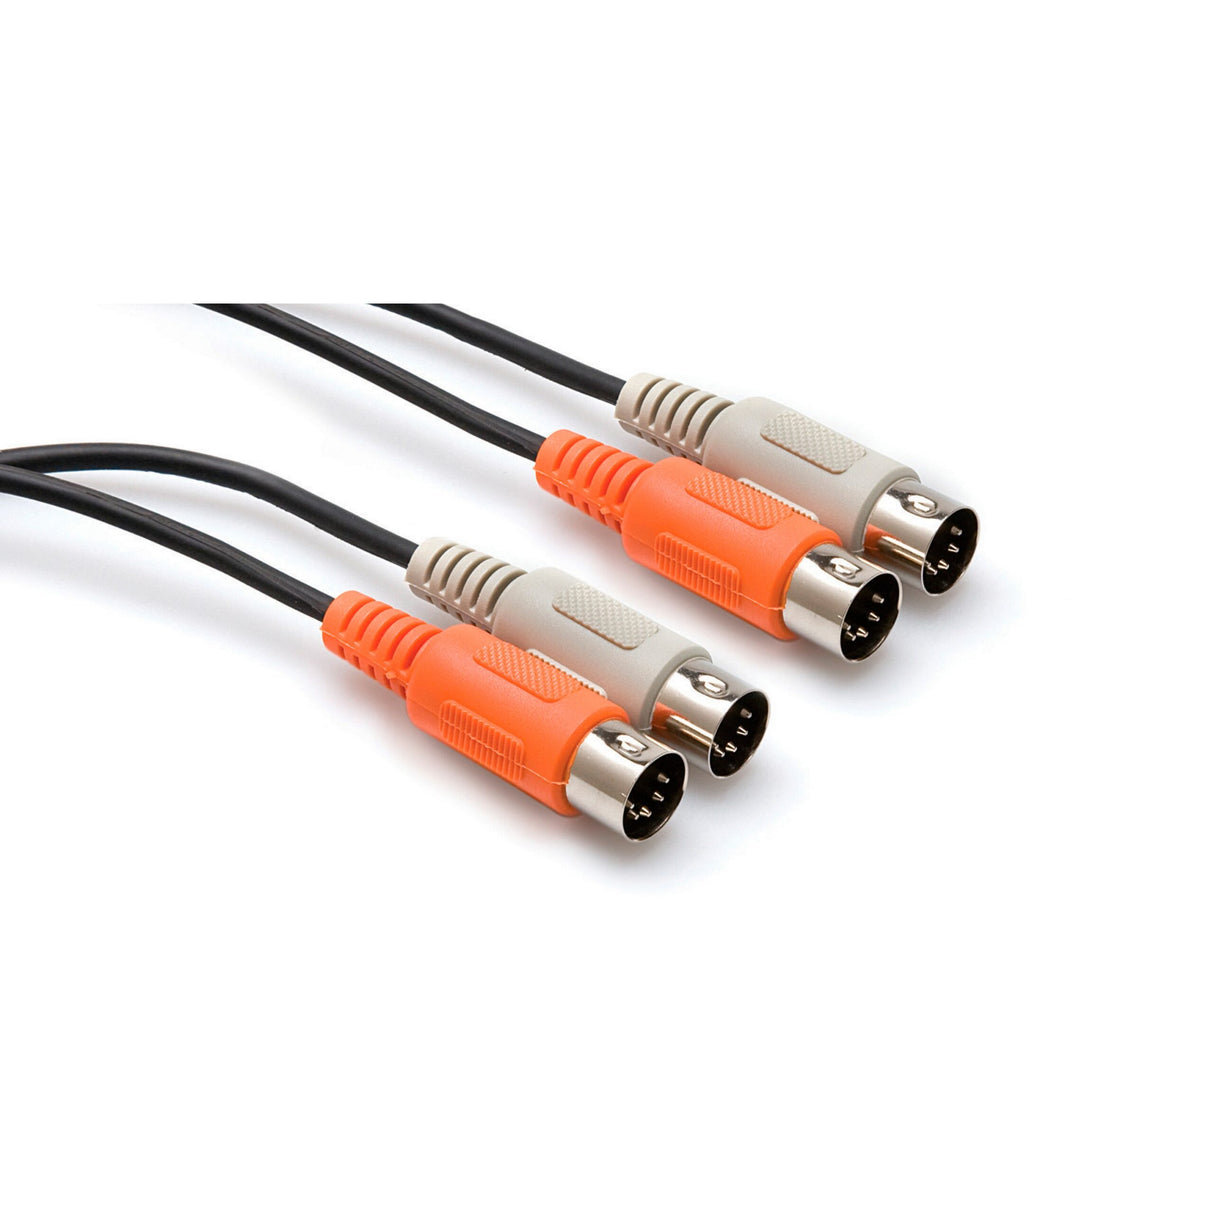 Hosa MID-204 Dual 5-pin DIN to Same MIDI Cable, 4 Meter